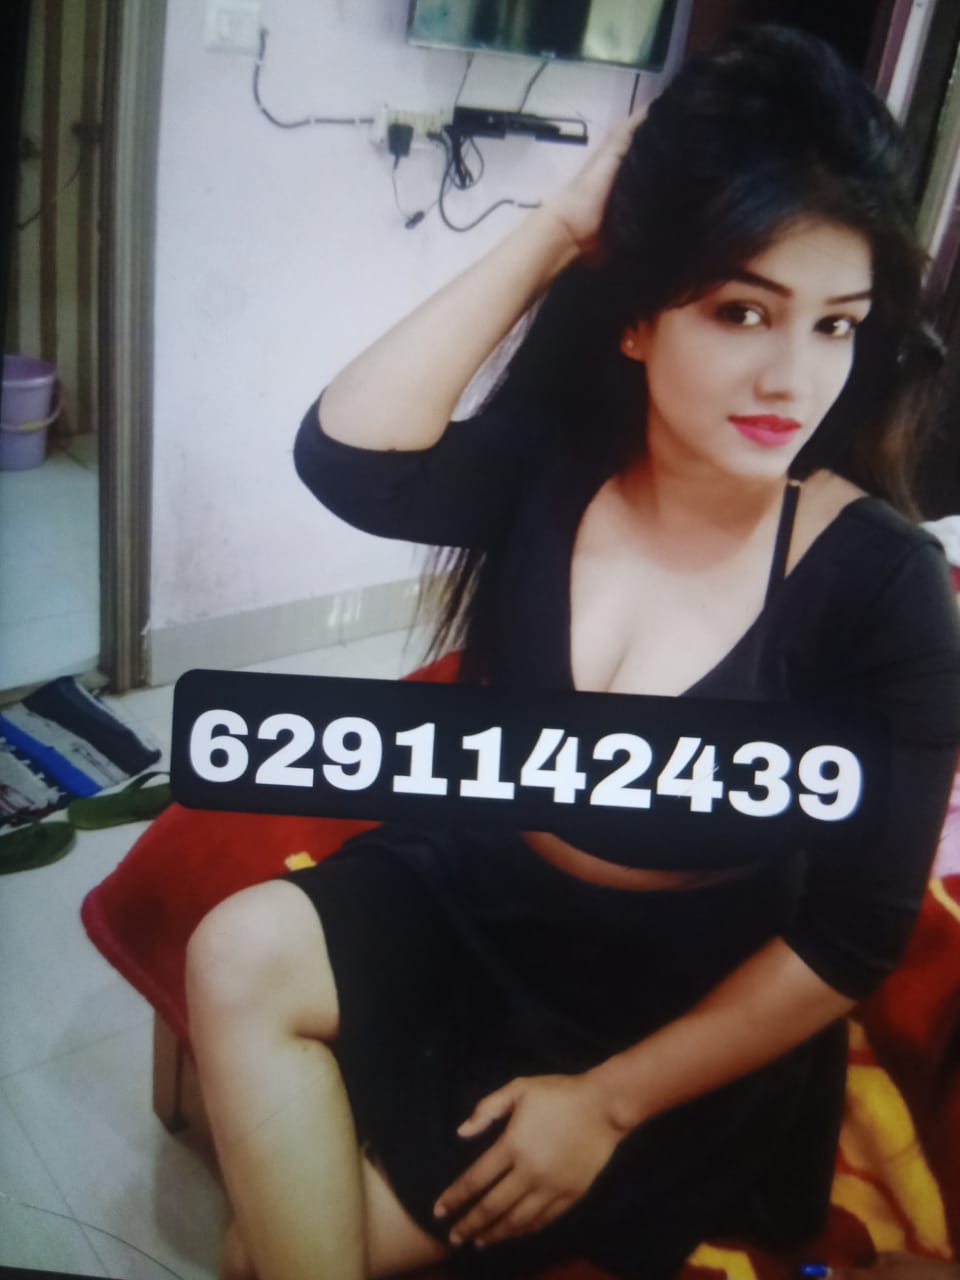  high profile college girl provide service any time service available 